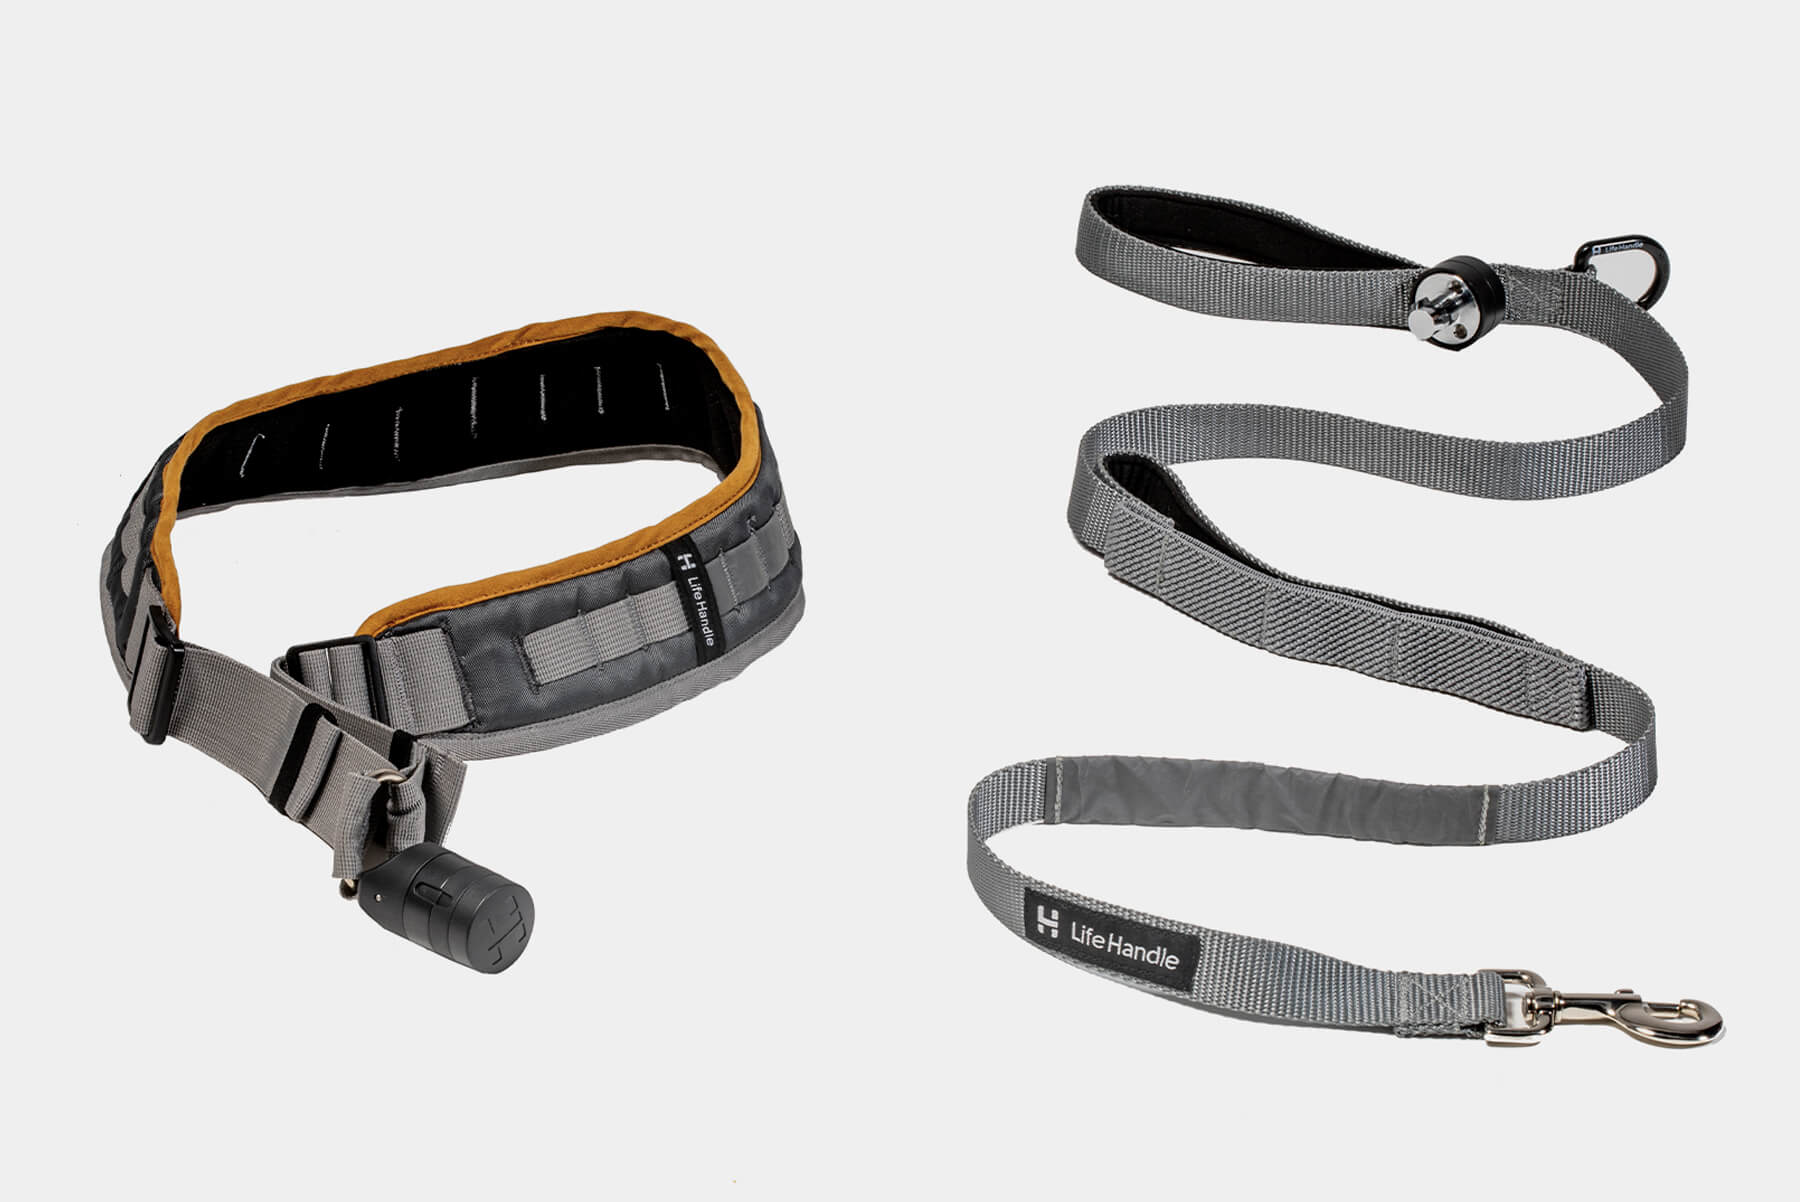 Best Dog Accessories For Summer: Collars, Leashes, and More